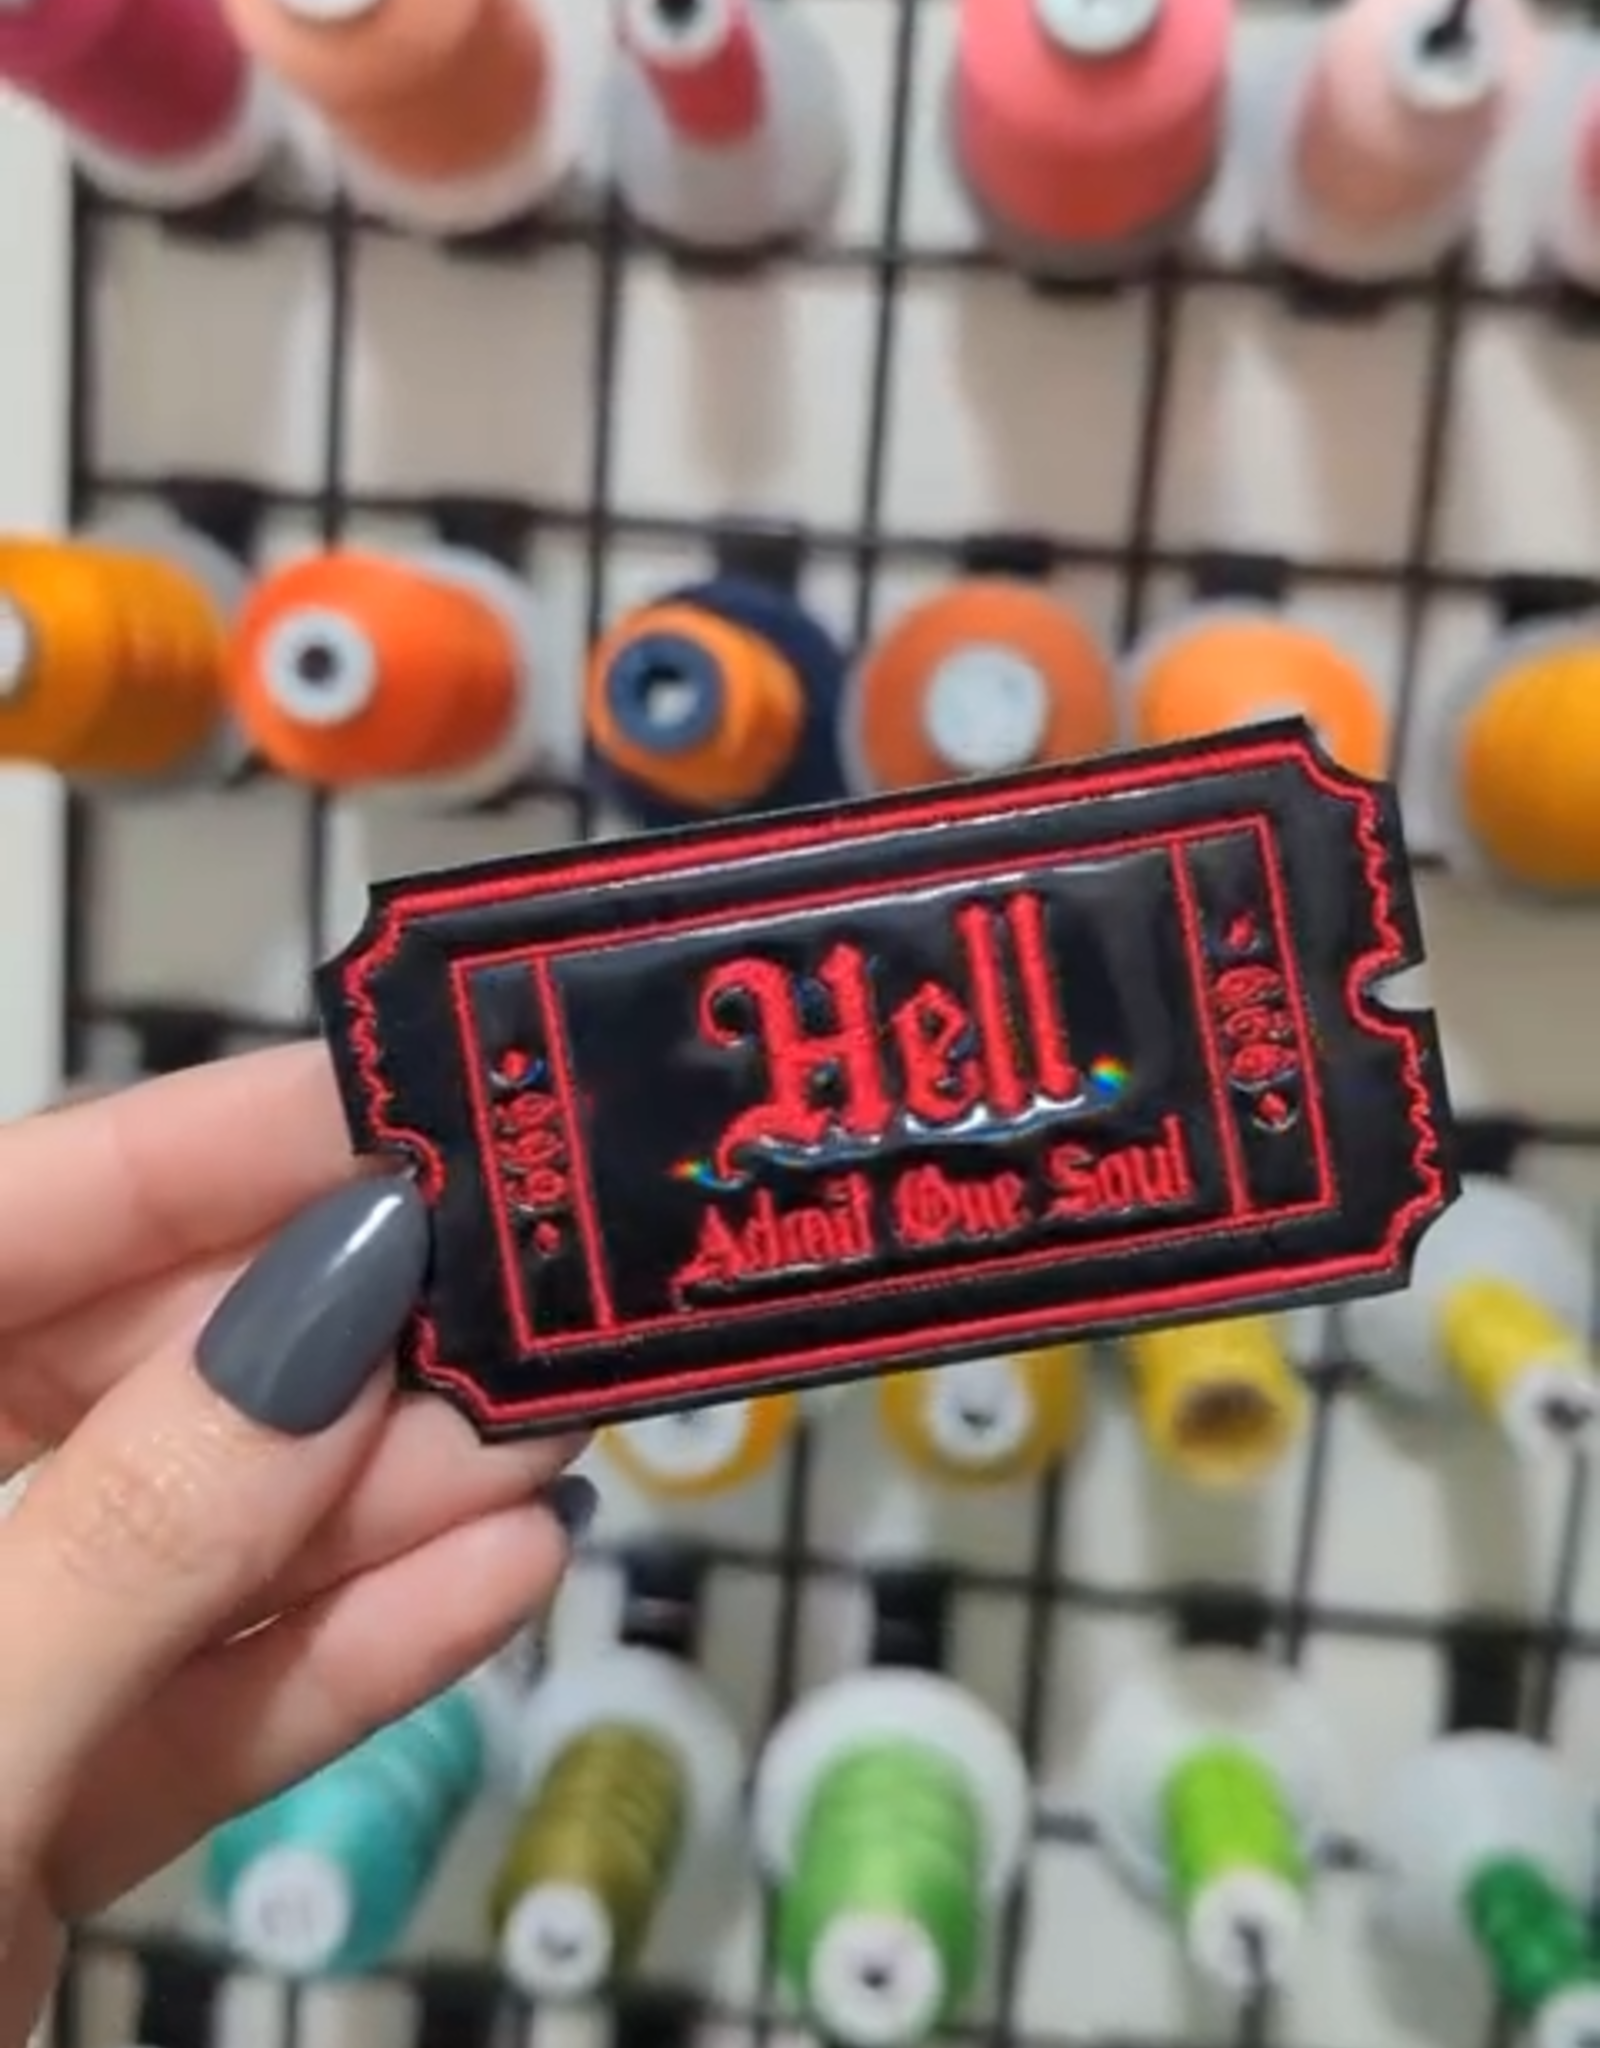 Black Holo Hell Admit One Soul 666 Gothic Iron On Patch